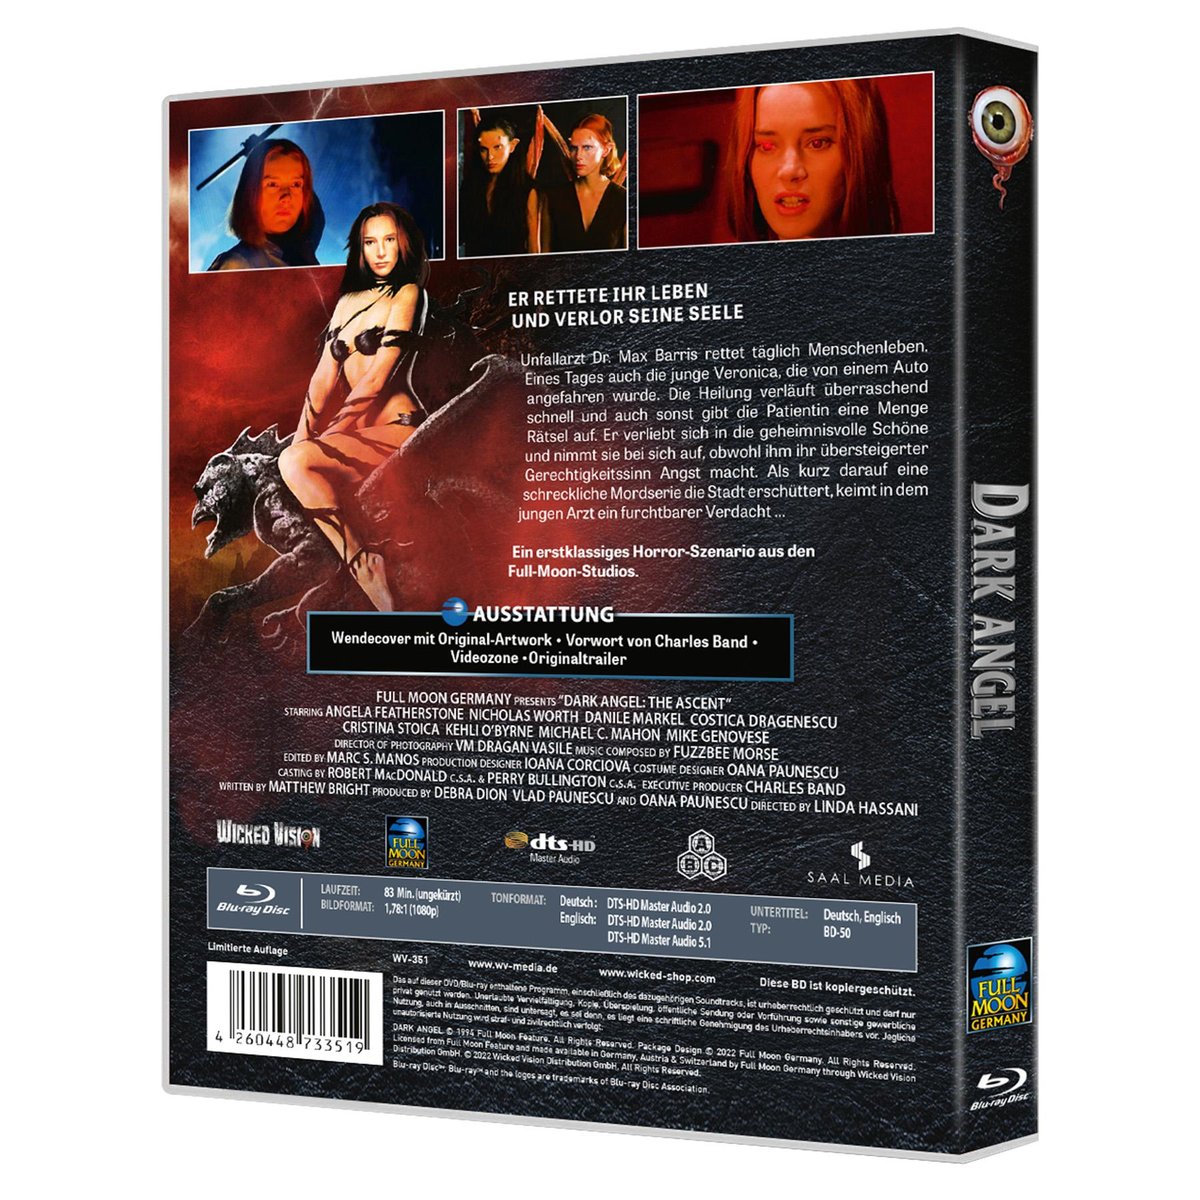 Dark Angel - Tochter des Satans - Full Moon Classic Selection (blu-ray)